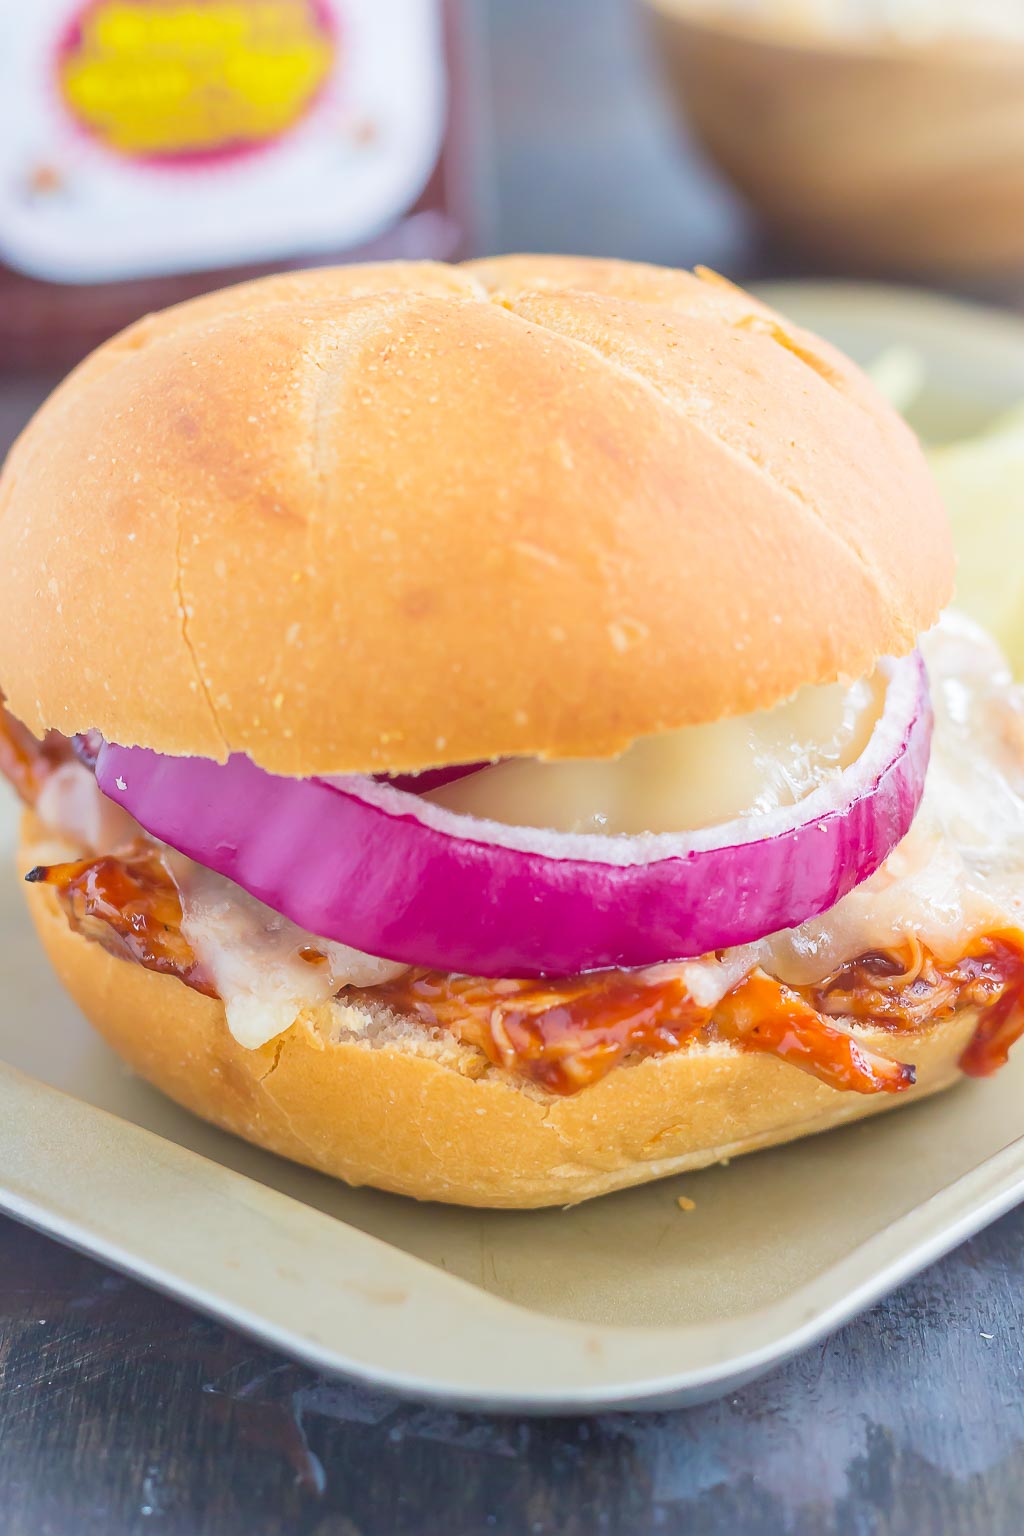 This Toasted Barbecue Chicken Sandwich is simple, fast, and the perfect meal for one! Shredded chicken is smothered with tangy barbecue sauce, then topped with Swiss cheese, red onions, and baked until melted and golden. Fresh, flavorful, and easy, you can have this meal ready in less than 15 minutes!